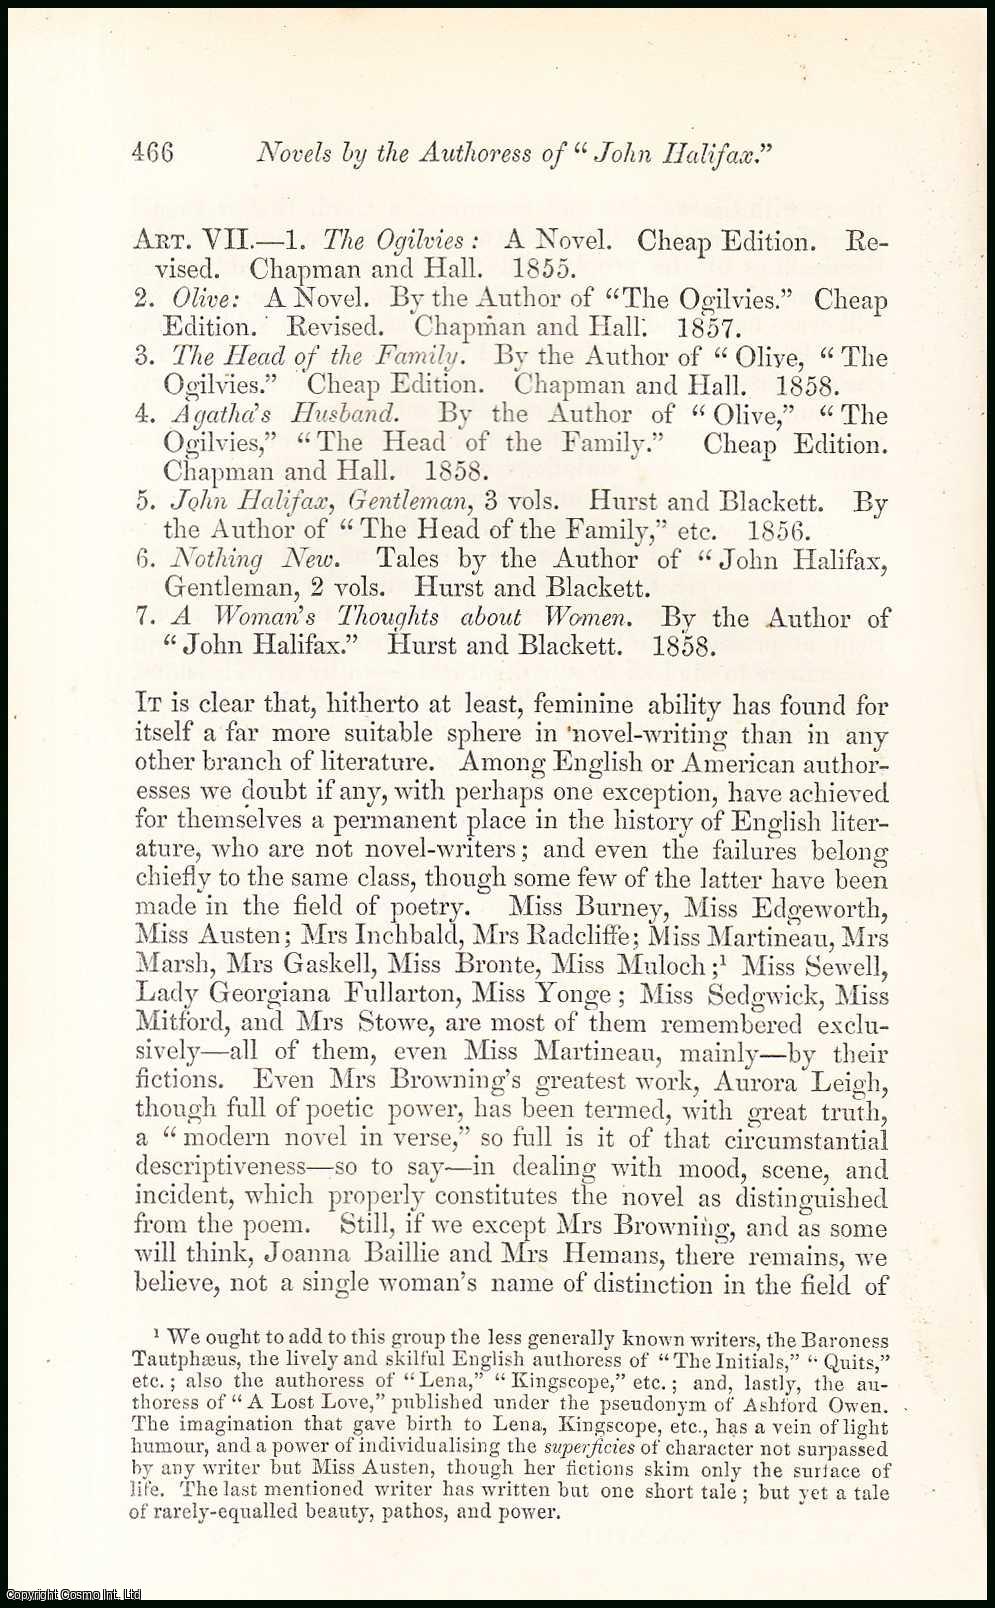 R.H. Hutton - Novels by the Authoress of John Halifax, Dinah Mulock. An uncommon original article from the North British Review, 1858.